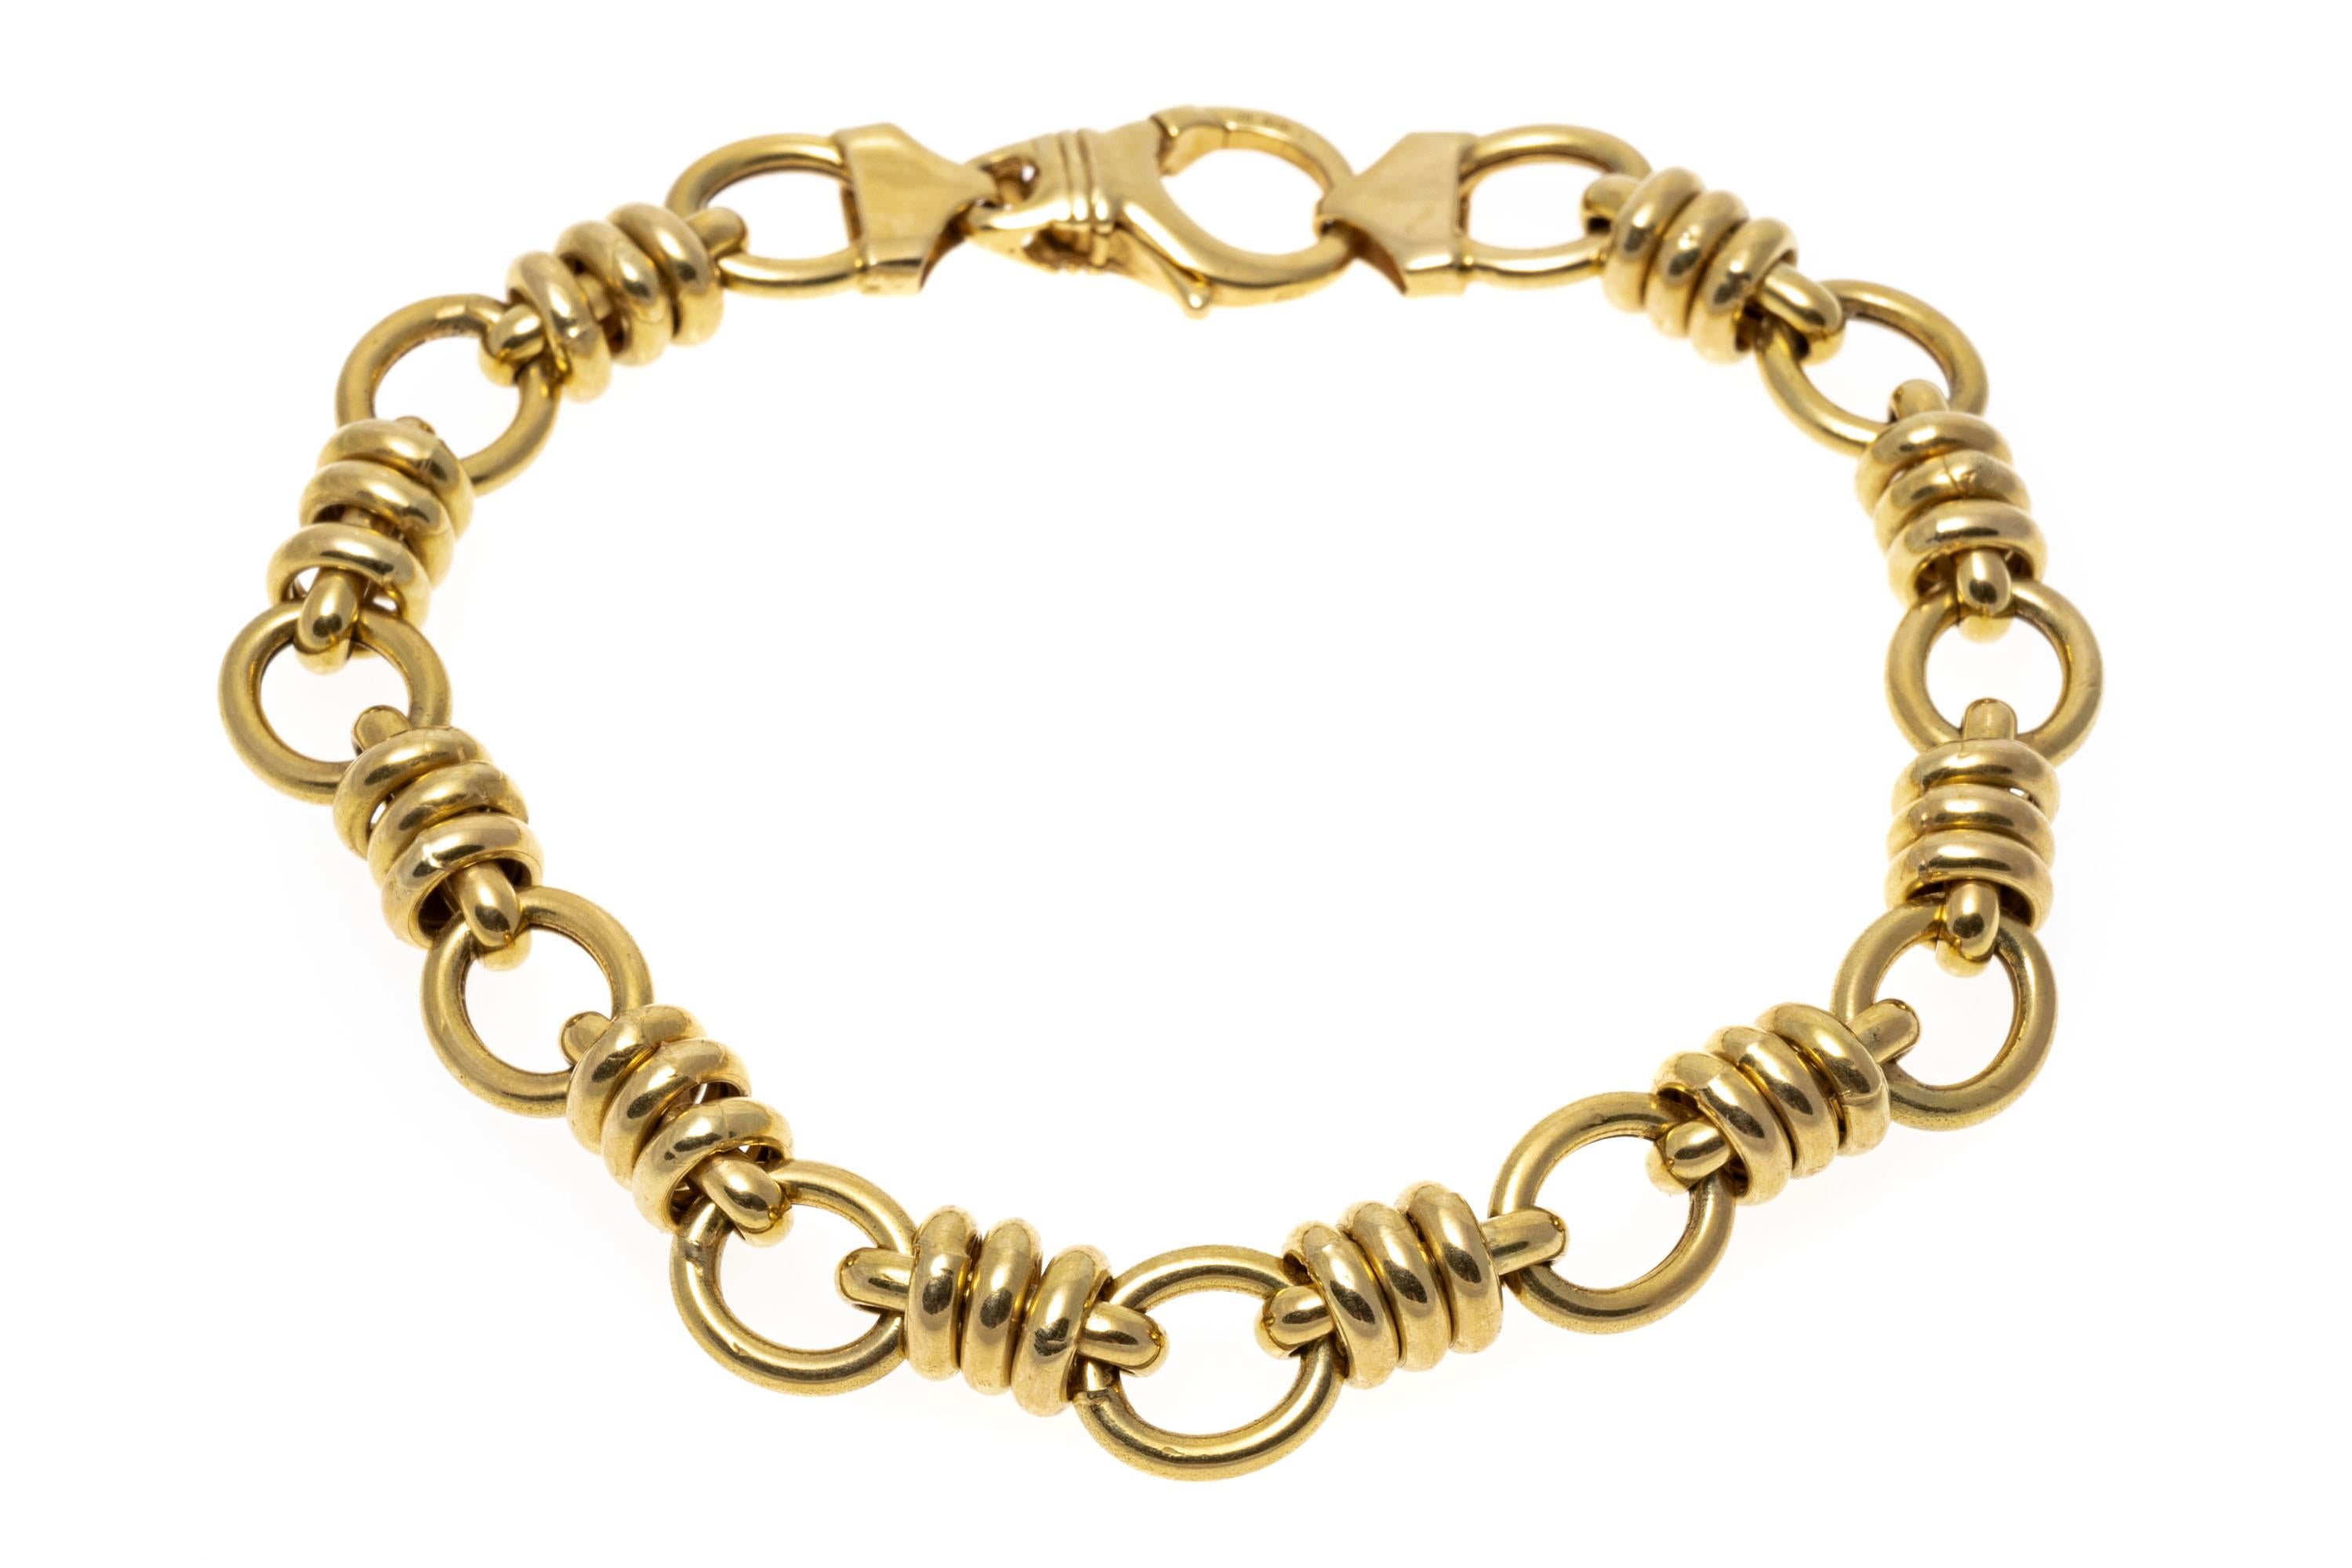 Designed in Italy, this 14K yellow gold bracelet presents an interesting design of alternating circular and bar style links. The bar style links are each wrapped in gold rings. Large lobster claw style clasp.
Marks: 14K Italy B
Dimensions: 8 1/8